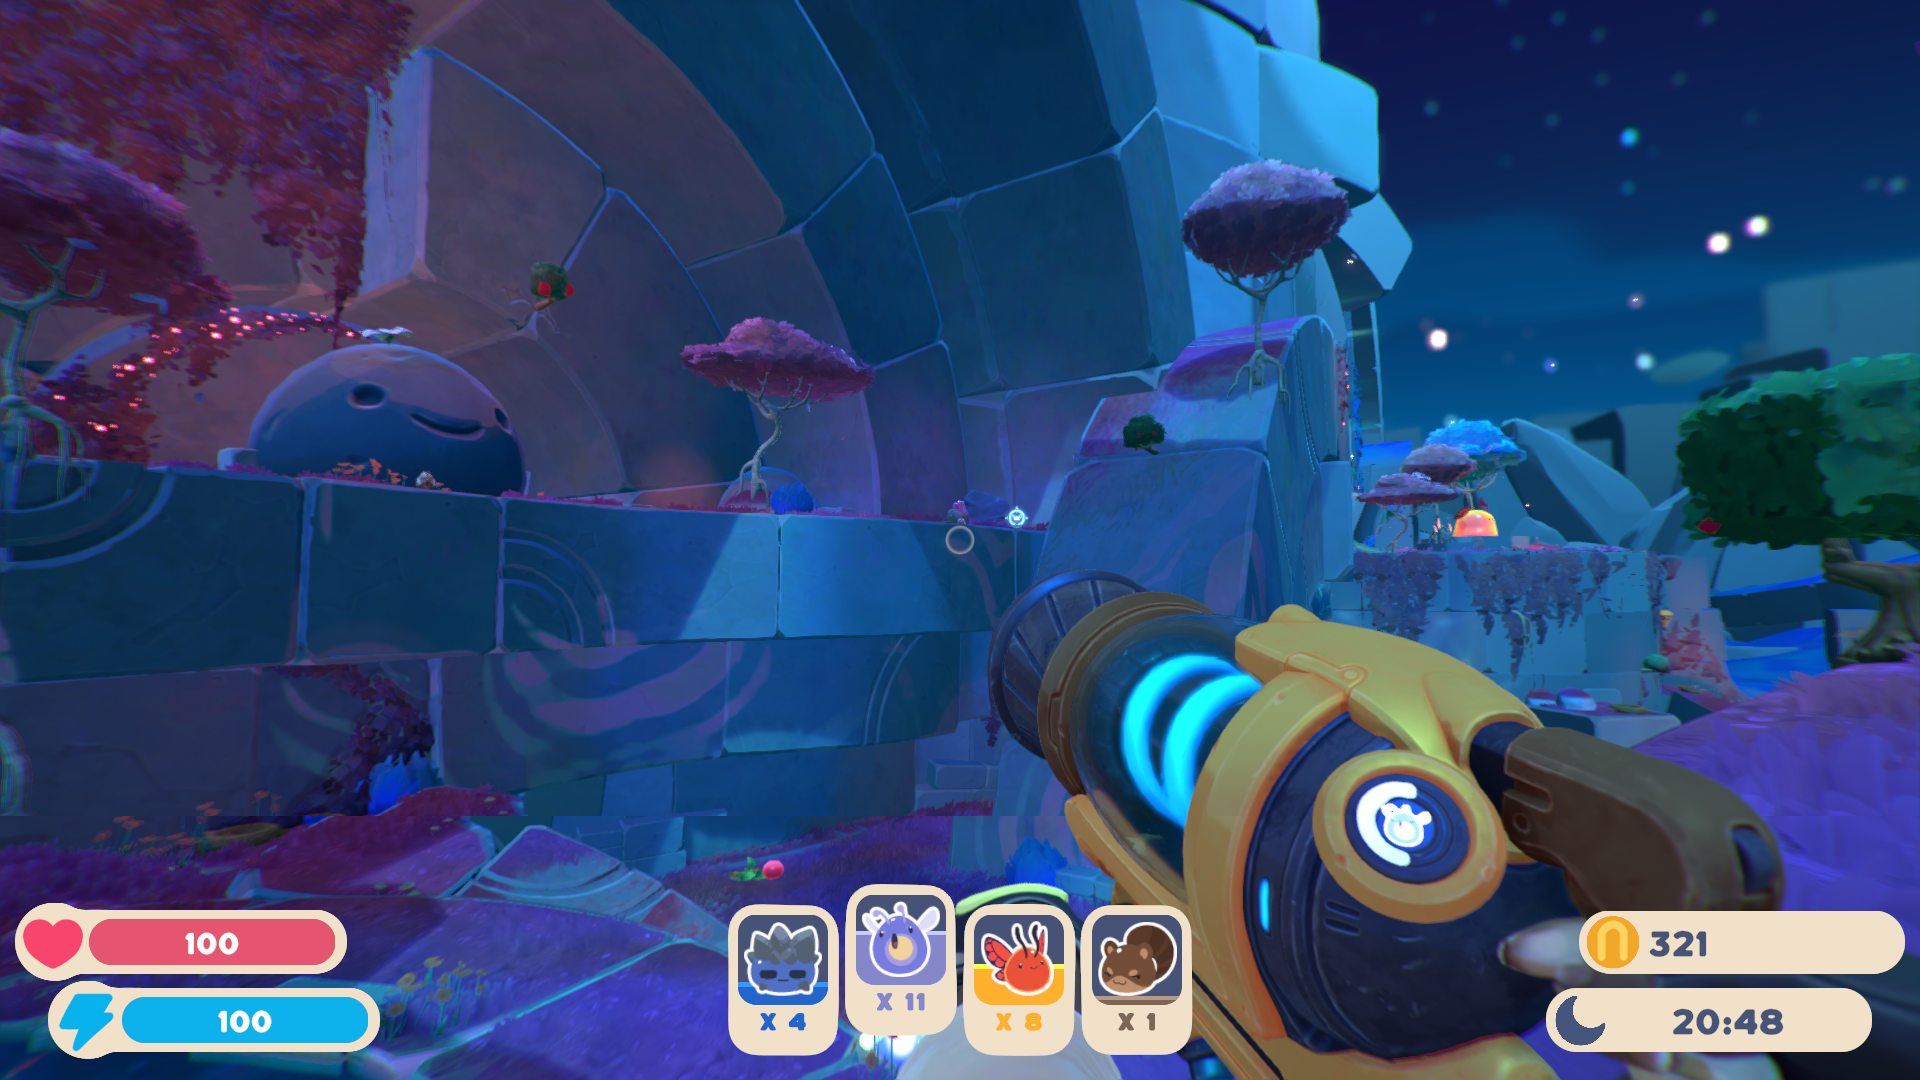 All MAP DATA NODES In POWDERFALL BLUFFS in Slime Rancher 2! 